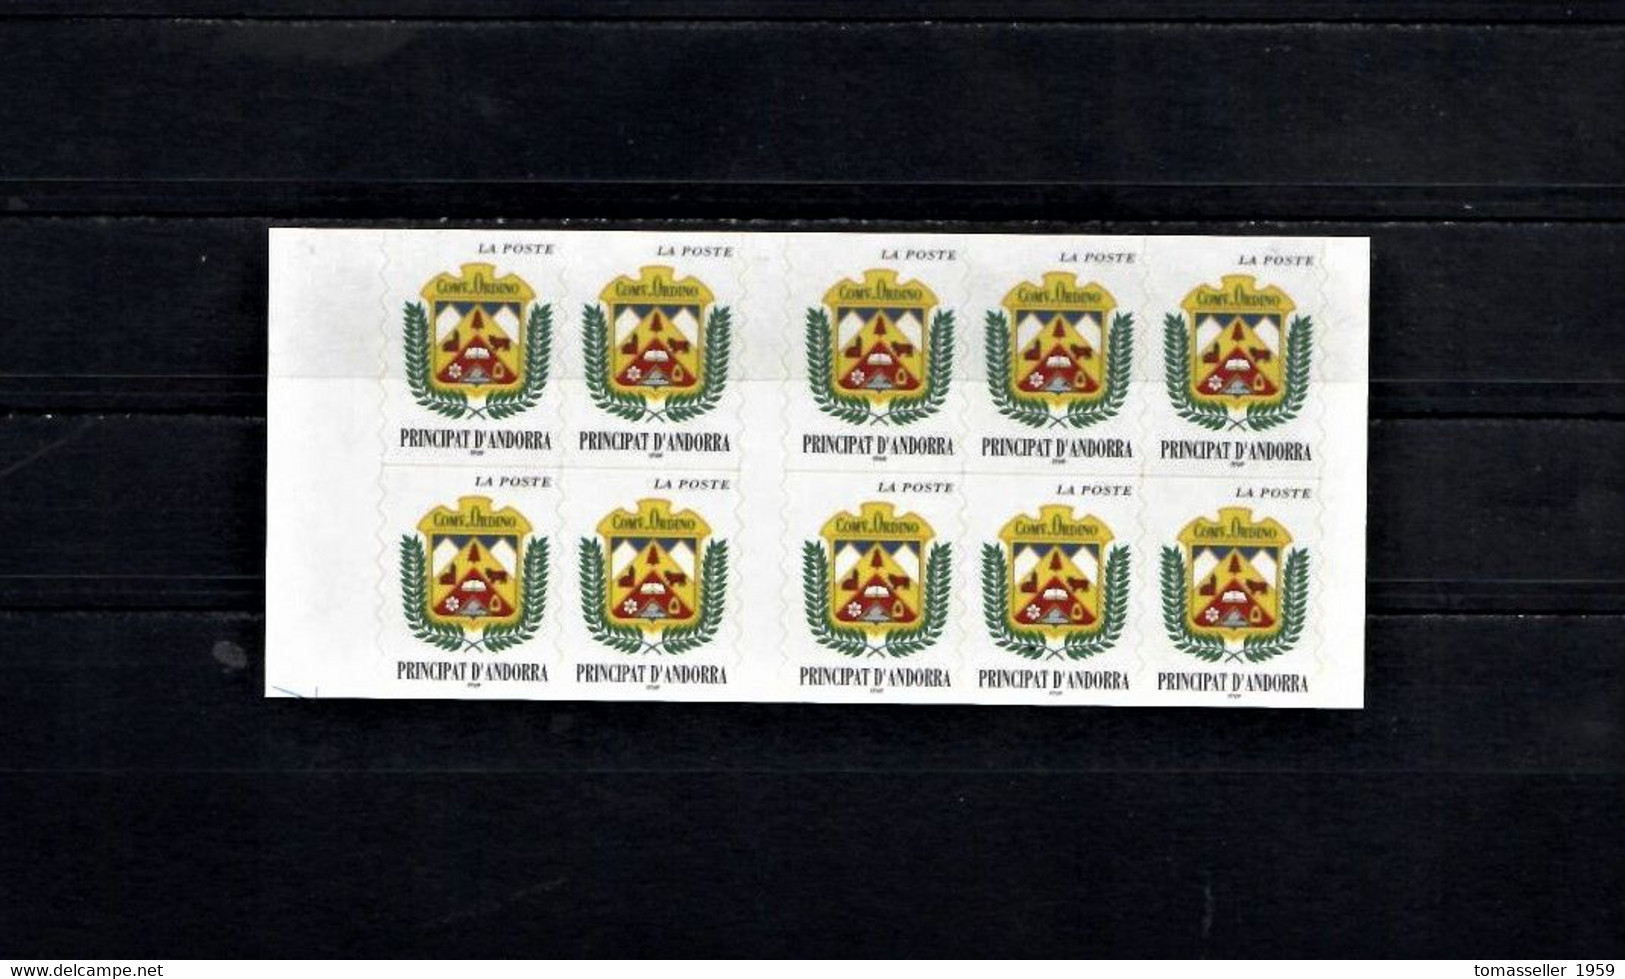 French Andorra 15!!! Years (1993-2007) sets.Almost 150 issues.MNH